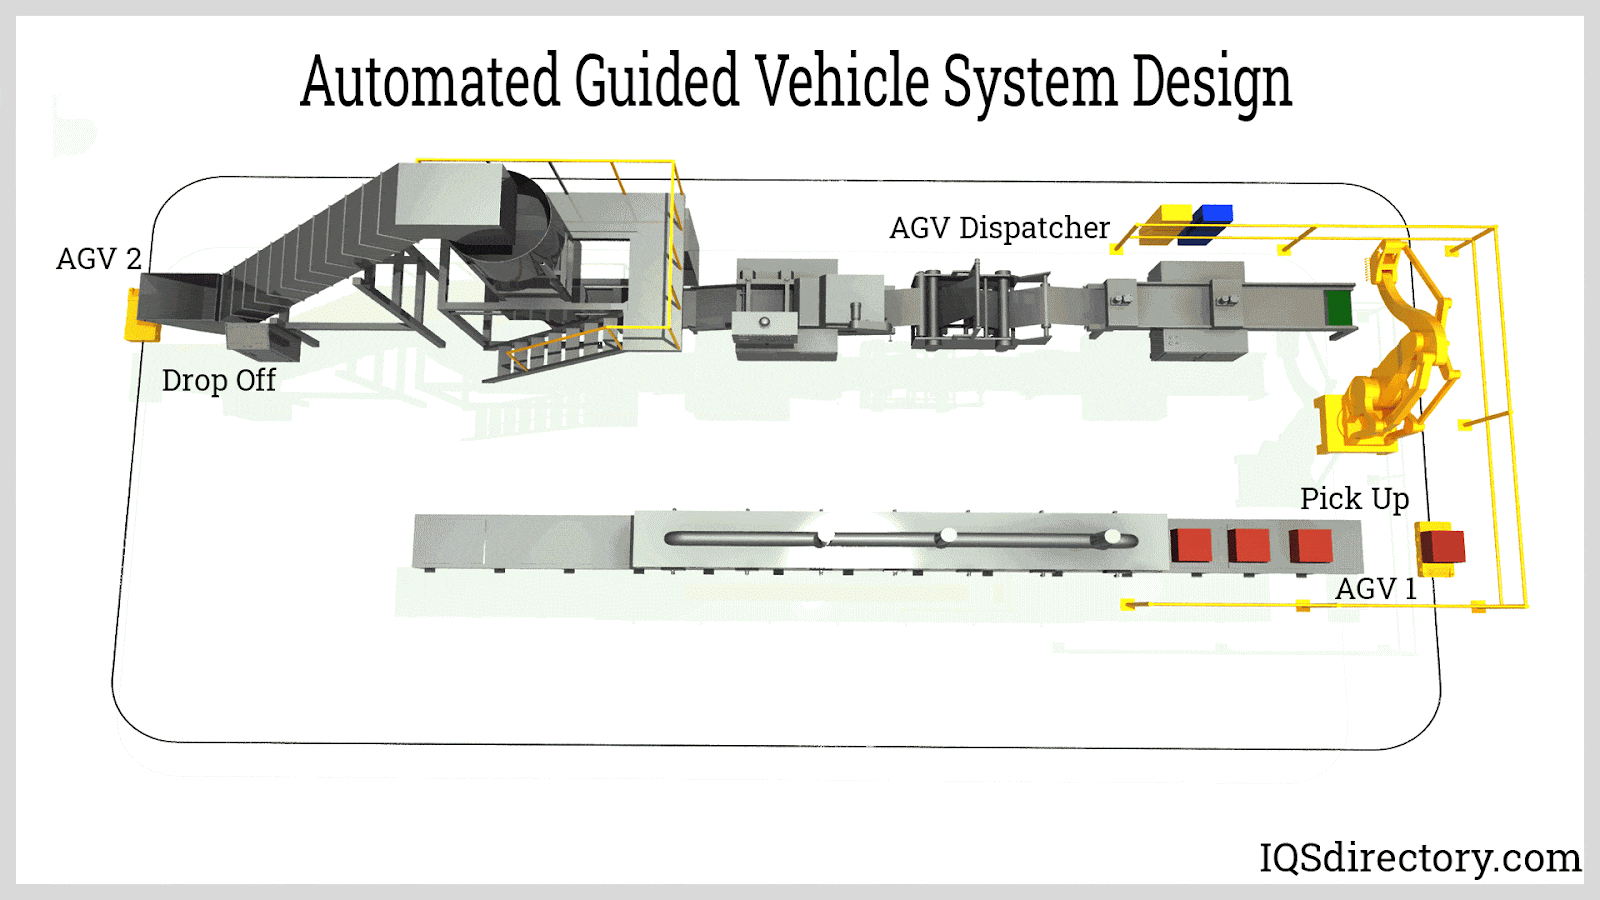 Automated Guided Vehicle System Design